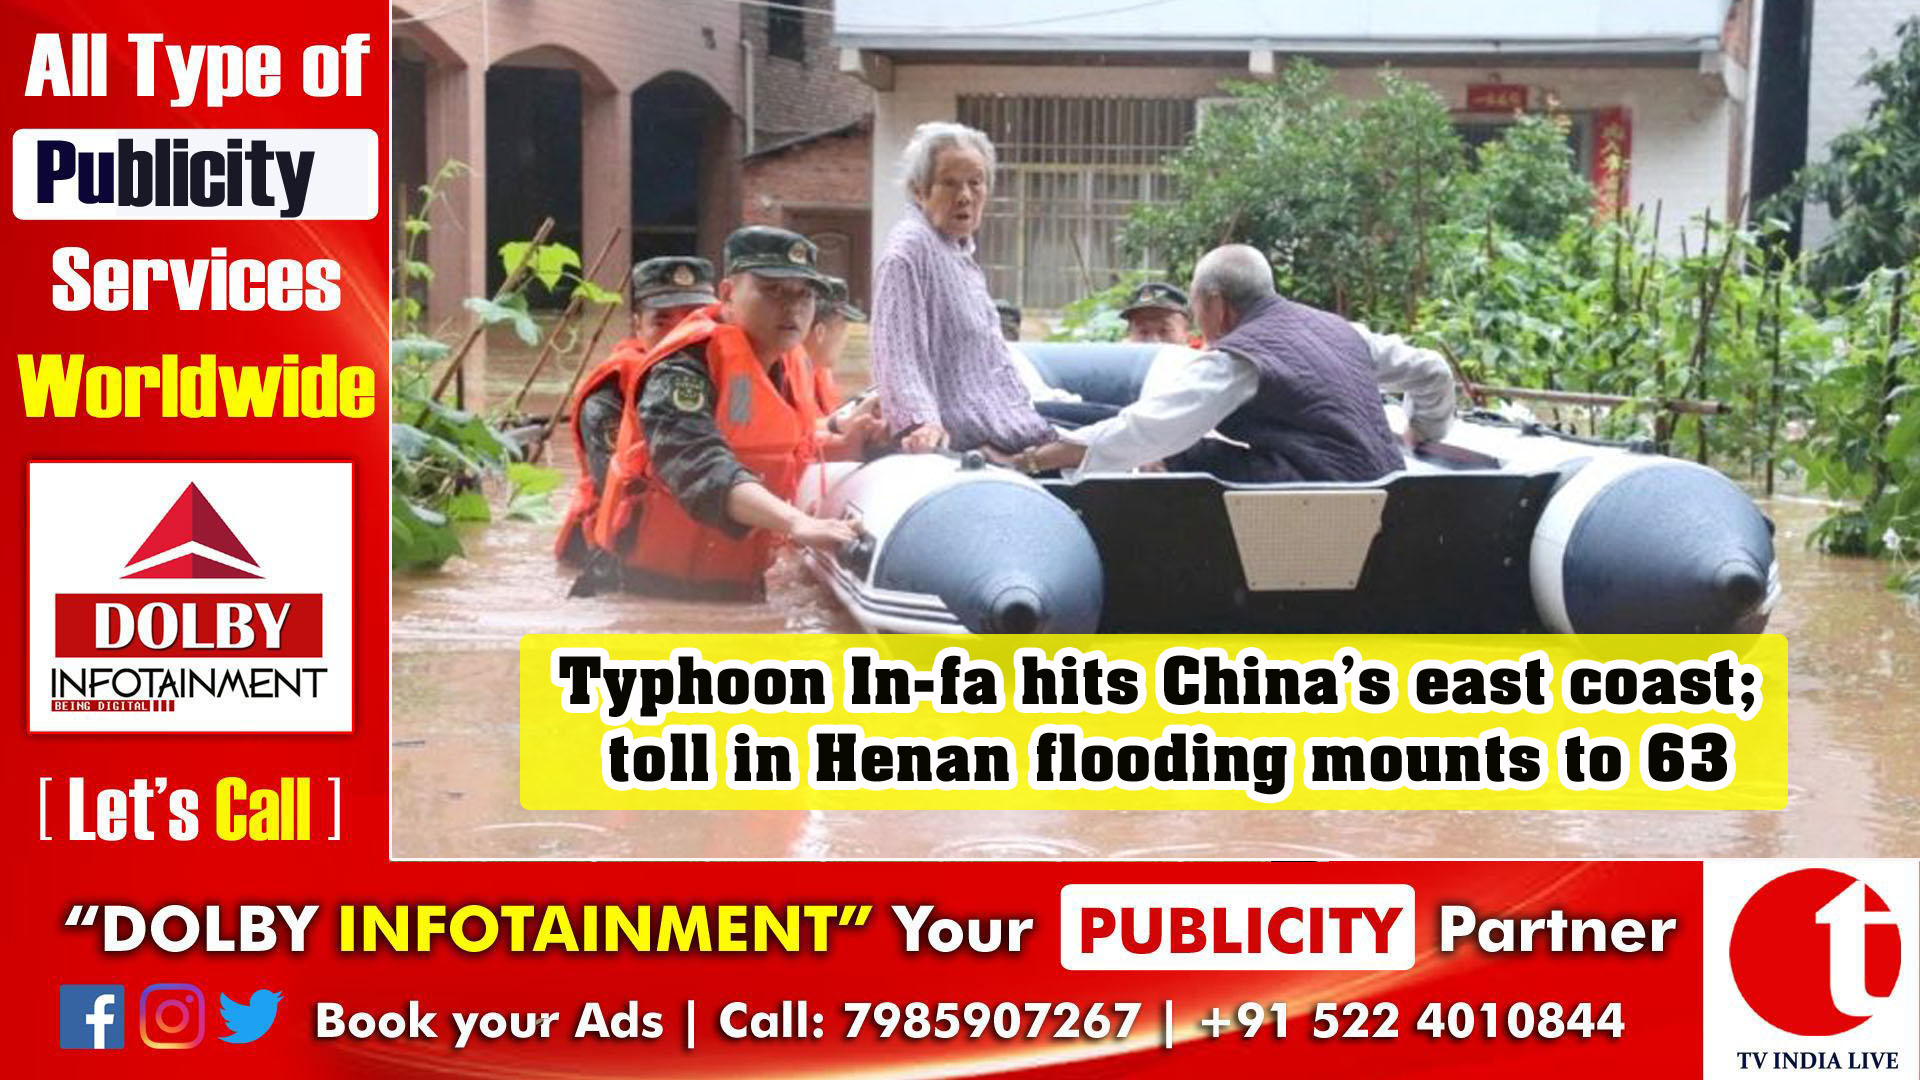 Typhoon In-fa hits China’s east coast; toll in Henan flooding mounts to 63